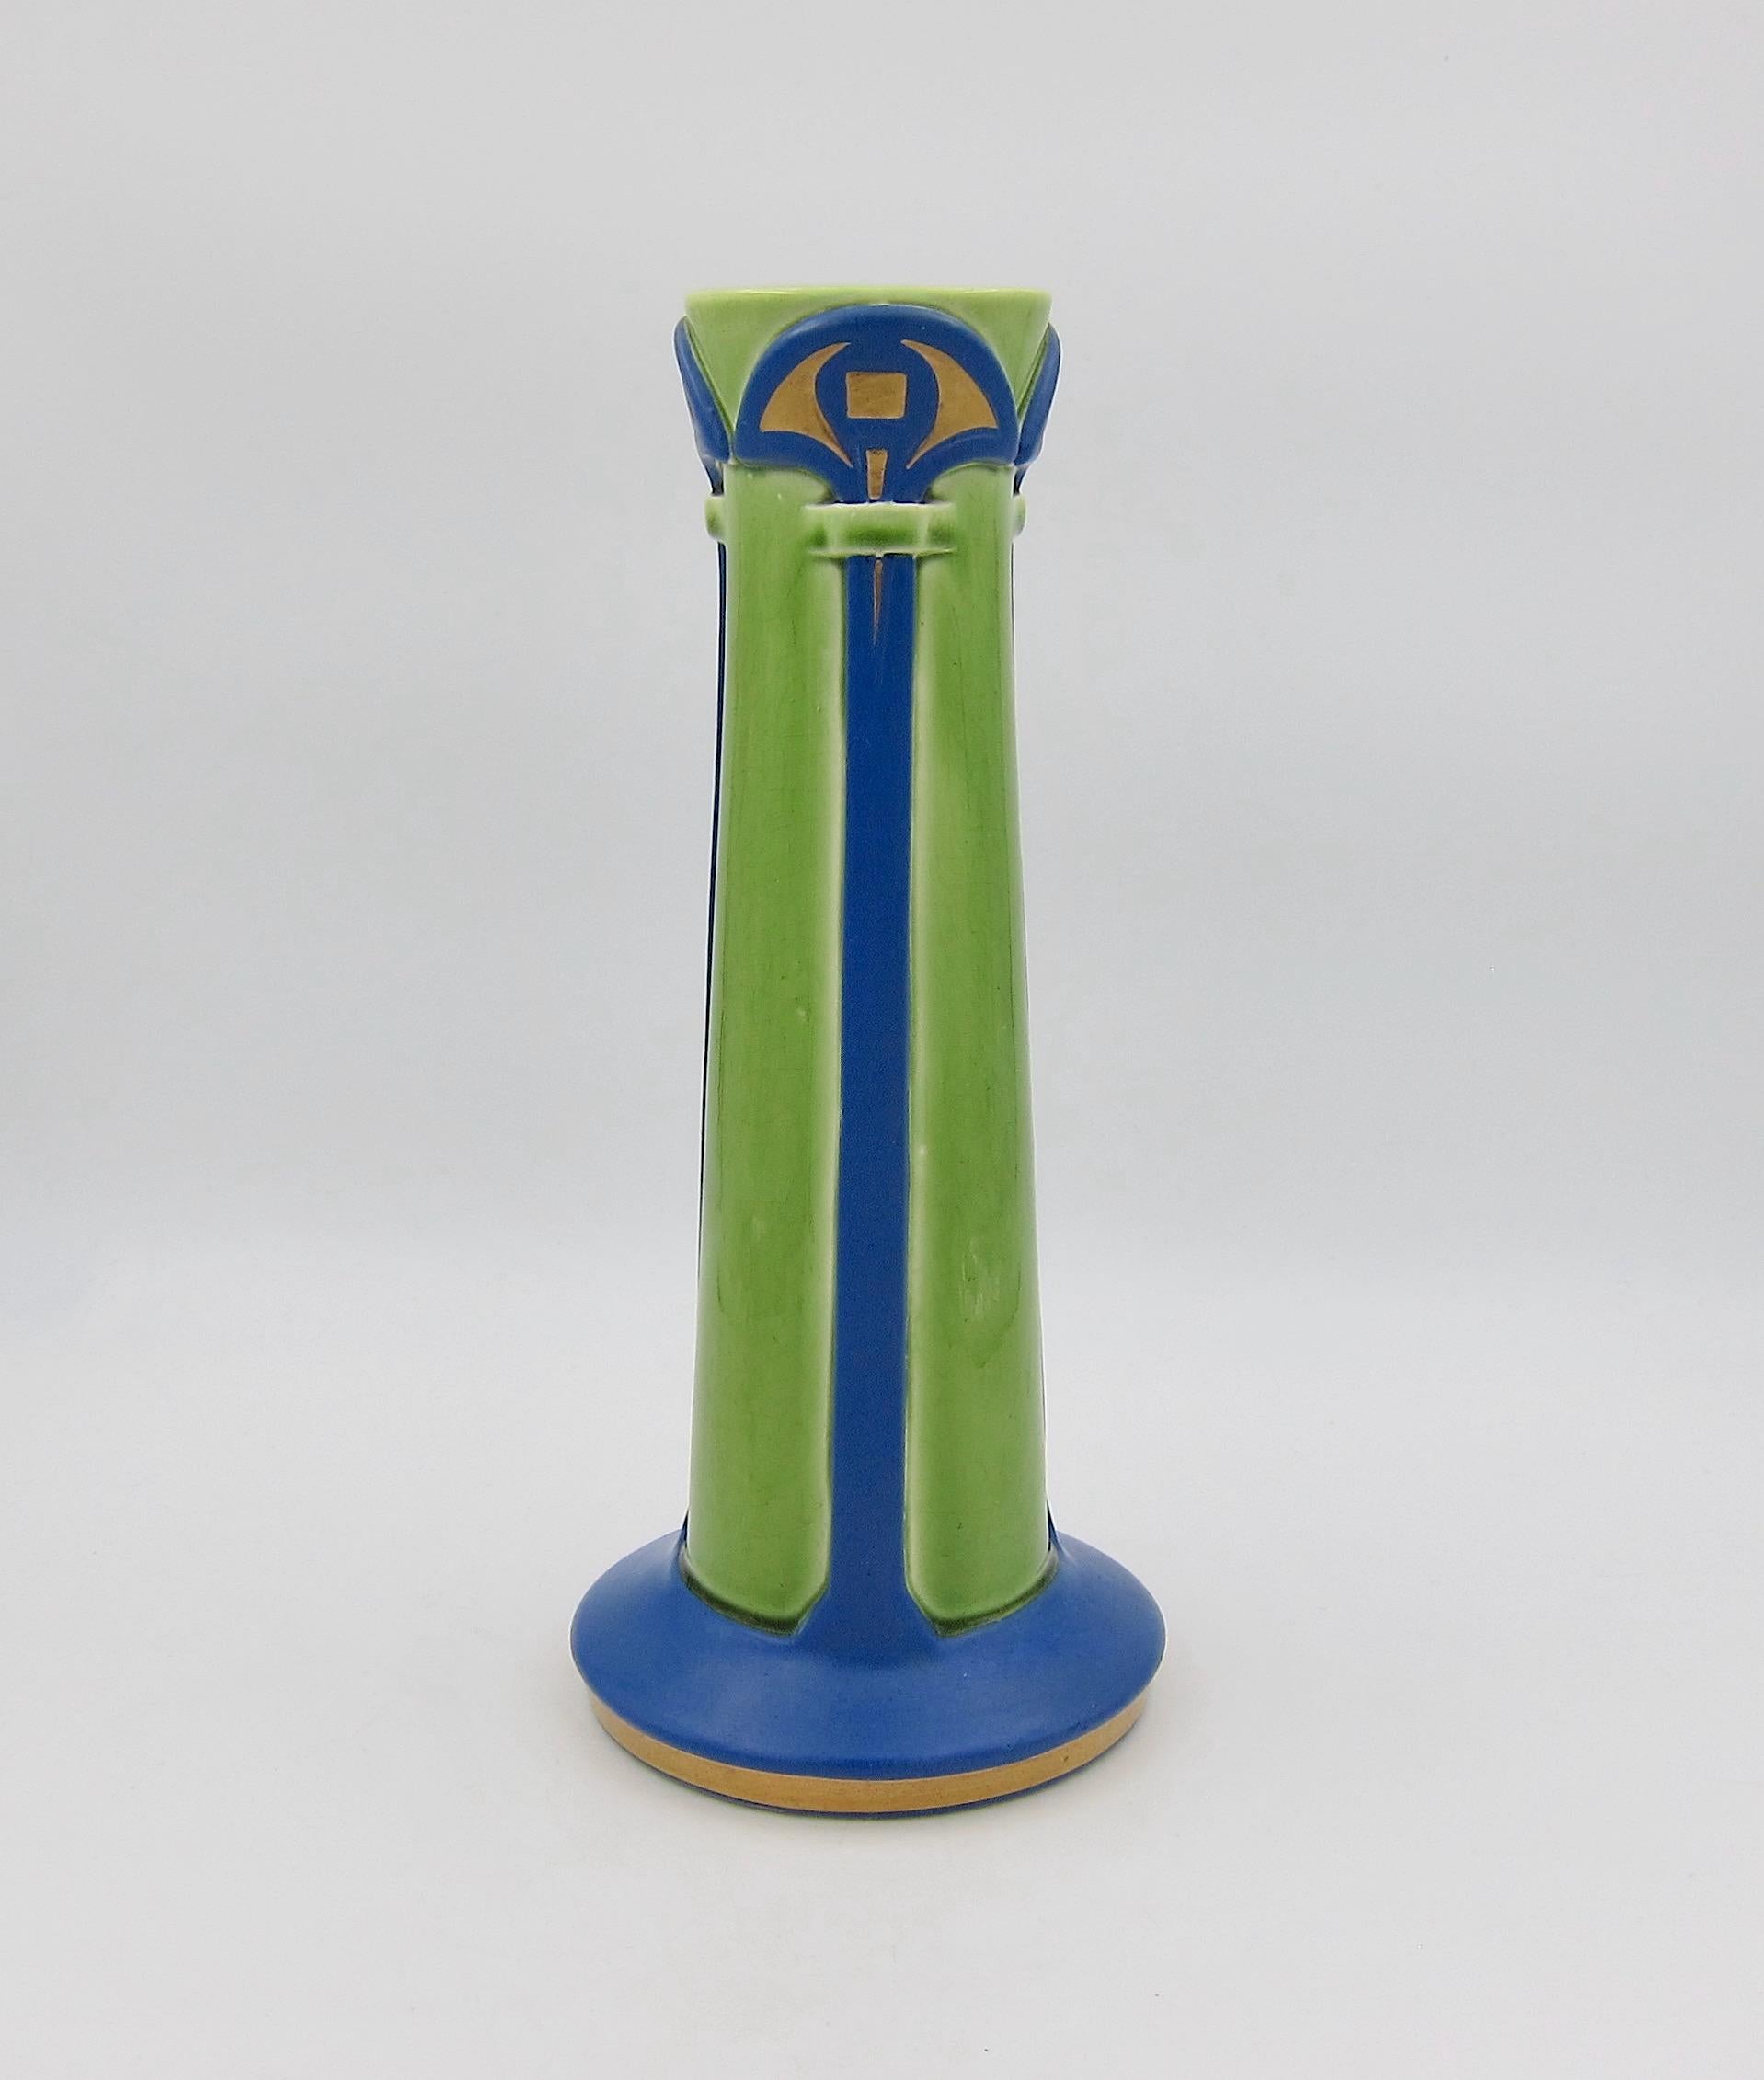 An early 20th century French art pottery vase date marked for 1906. The antique vase from the Sarreguemines factory is shaped like an architectural column or pillar on a round pedestal base and decorated in a bright, bold majolica glaze of glossy